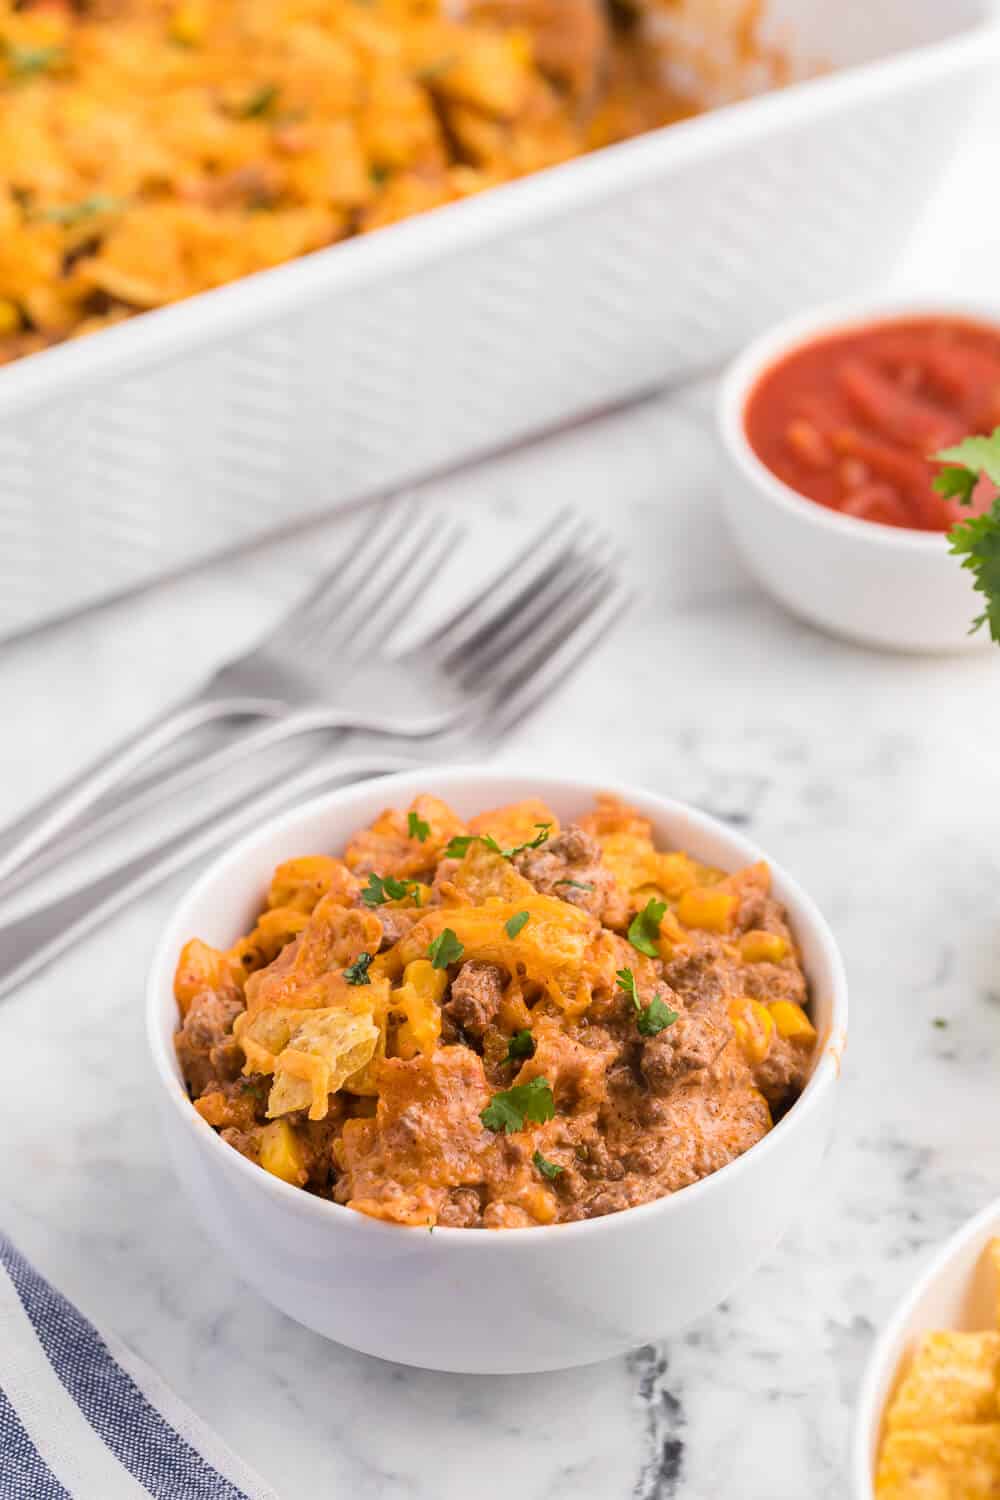 Beef nacho bake served in a white bowl.